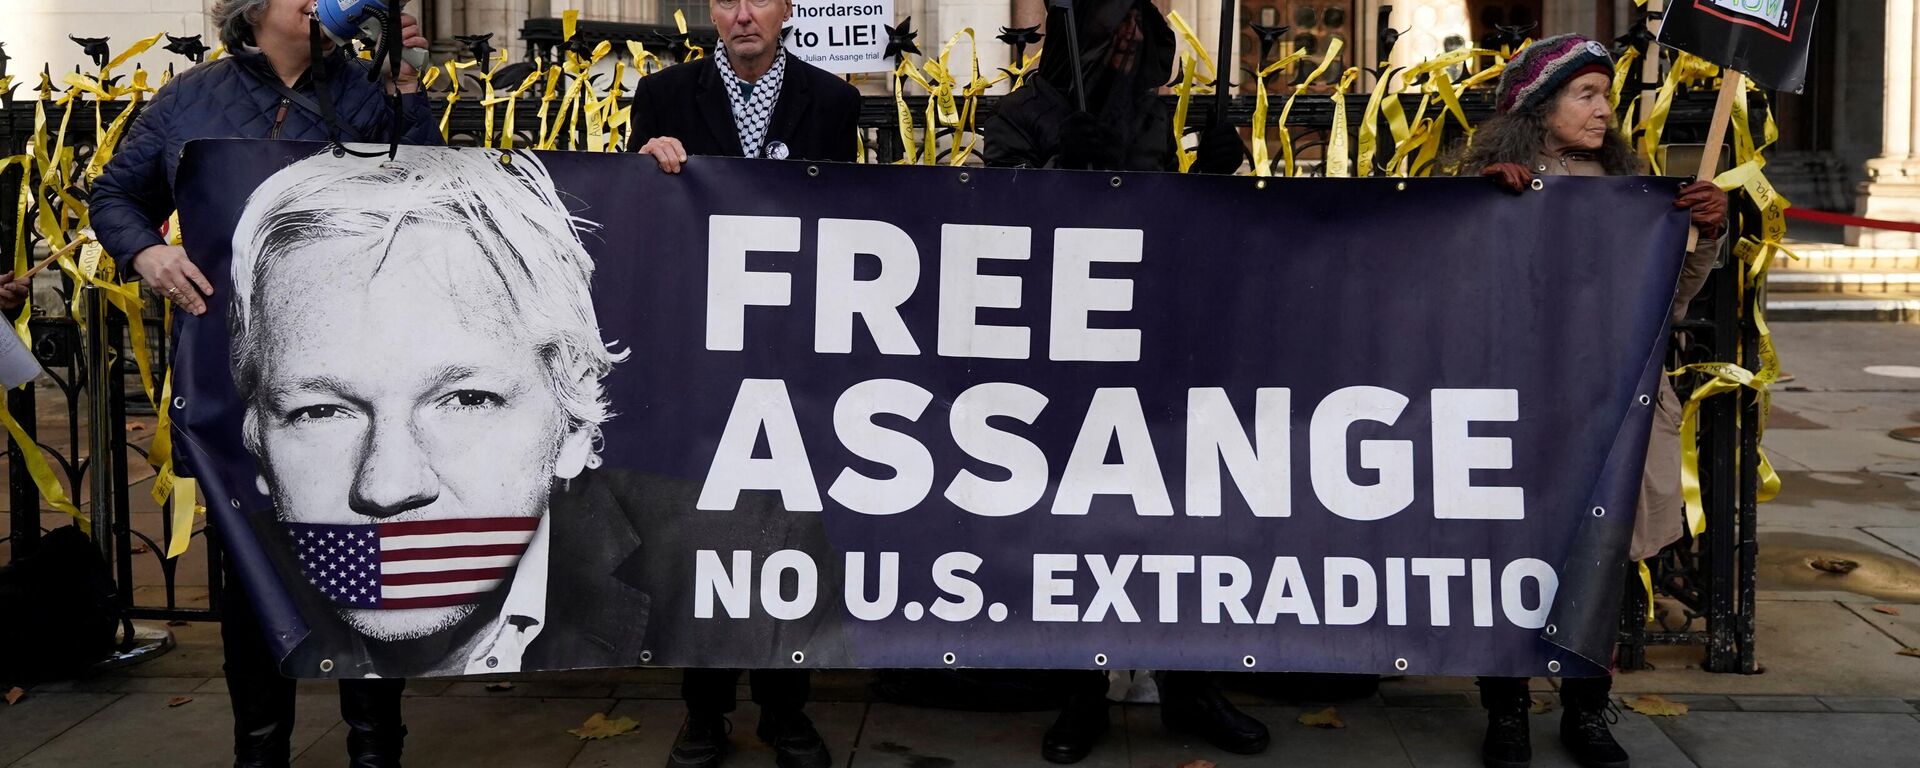 Supporters of WikiLeaks founder Julian Assange, hold placards outside the Royal Courts of Justice in London on December 10, 2021. - Sputnik International, 1920, 20.04.2022